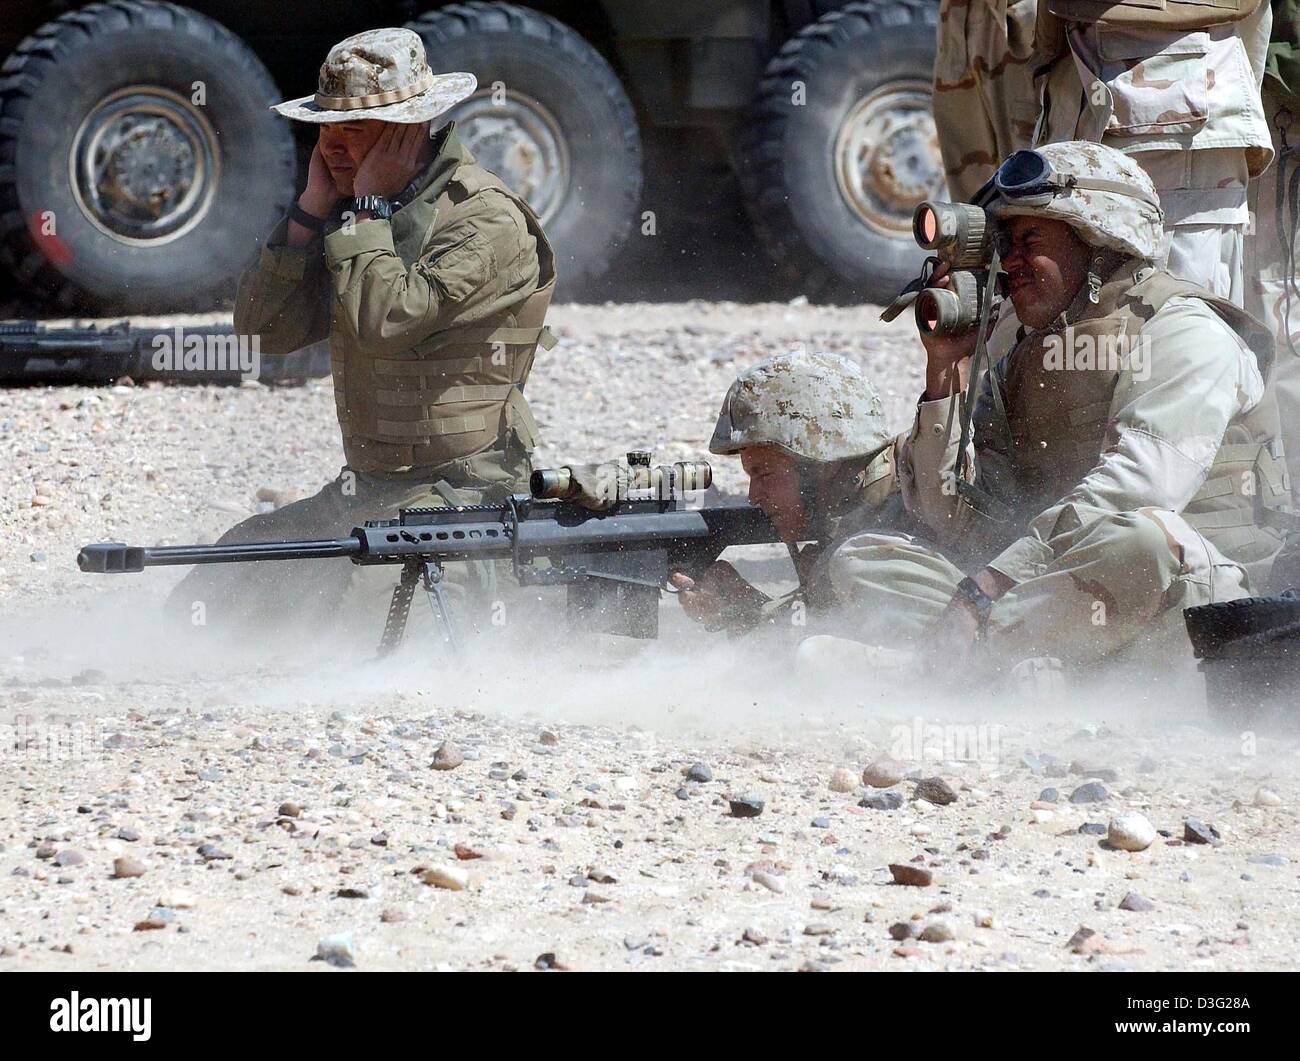 (dpa) - US marines of the Delta Company of the 3rd Light Amoured Reconnaissance Battalion (3rd LAR) practise shooting with live ammunition in Camp Coyote, Kuwait, 14 March 2003. More than 150,000 US and British soldiers are presently based in Kuwait's northern desert. According to the US Department of Defense, these soldiers are prepared to launch an attack on Iraq. Stock Photo